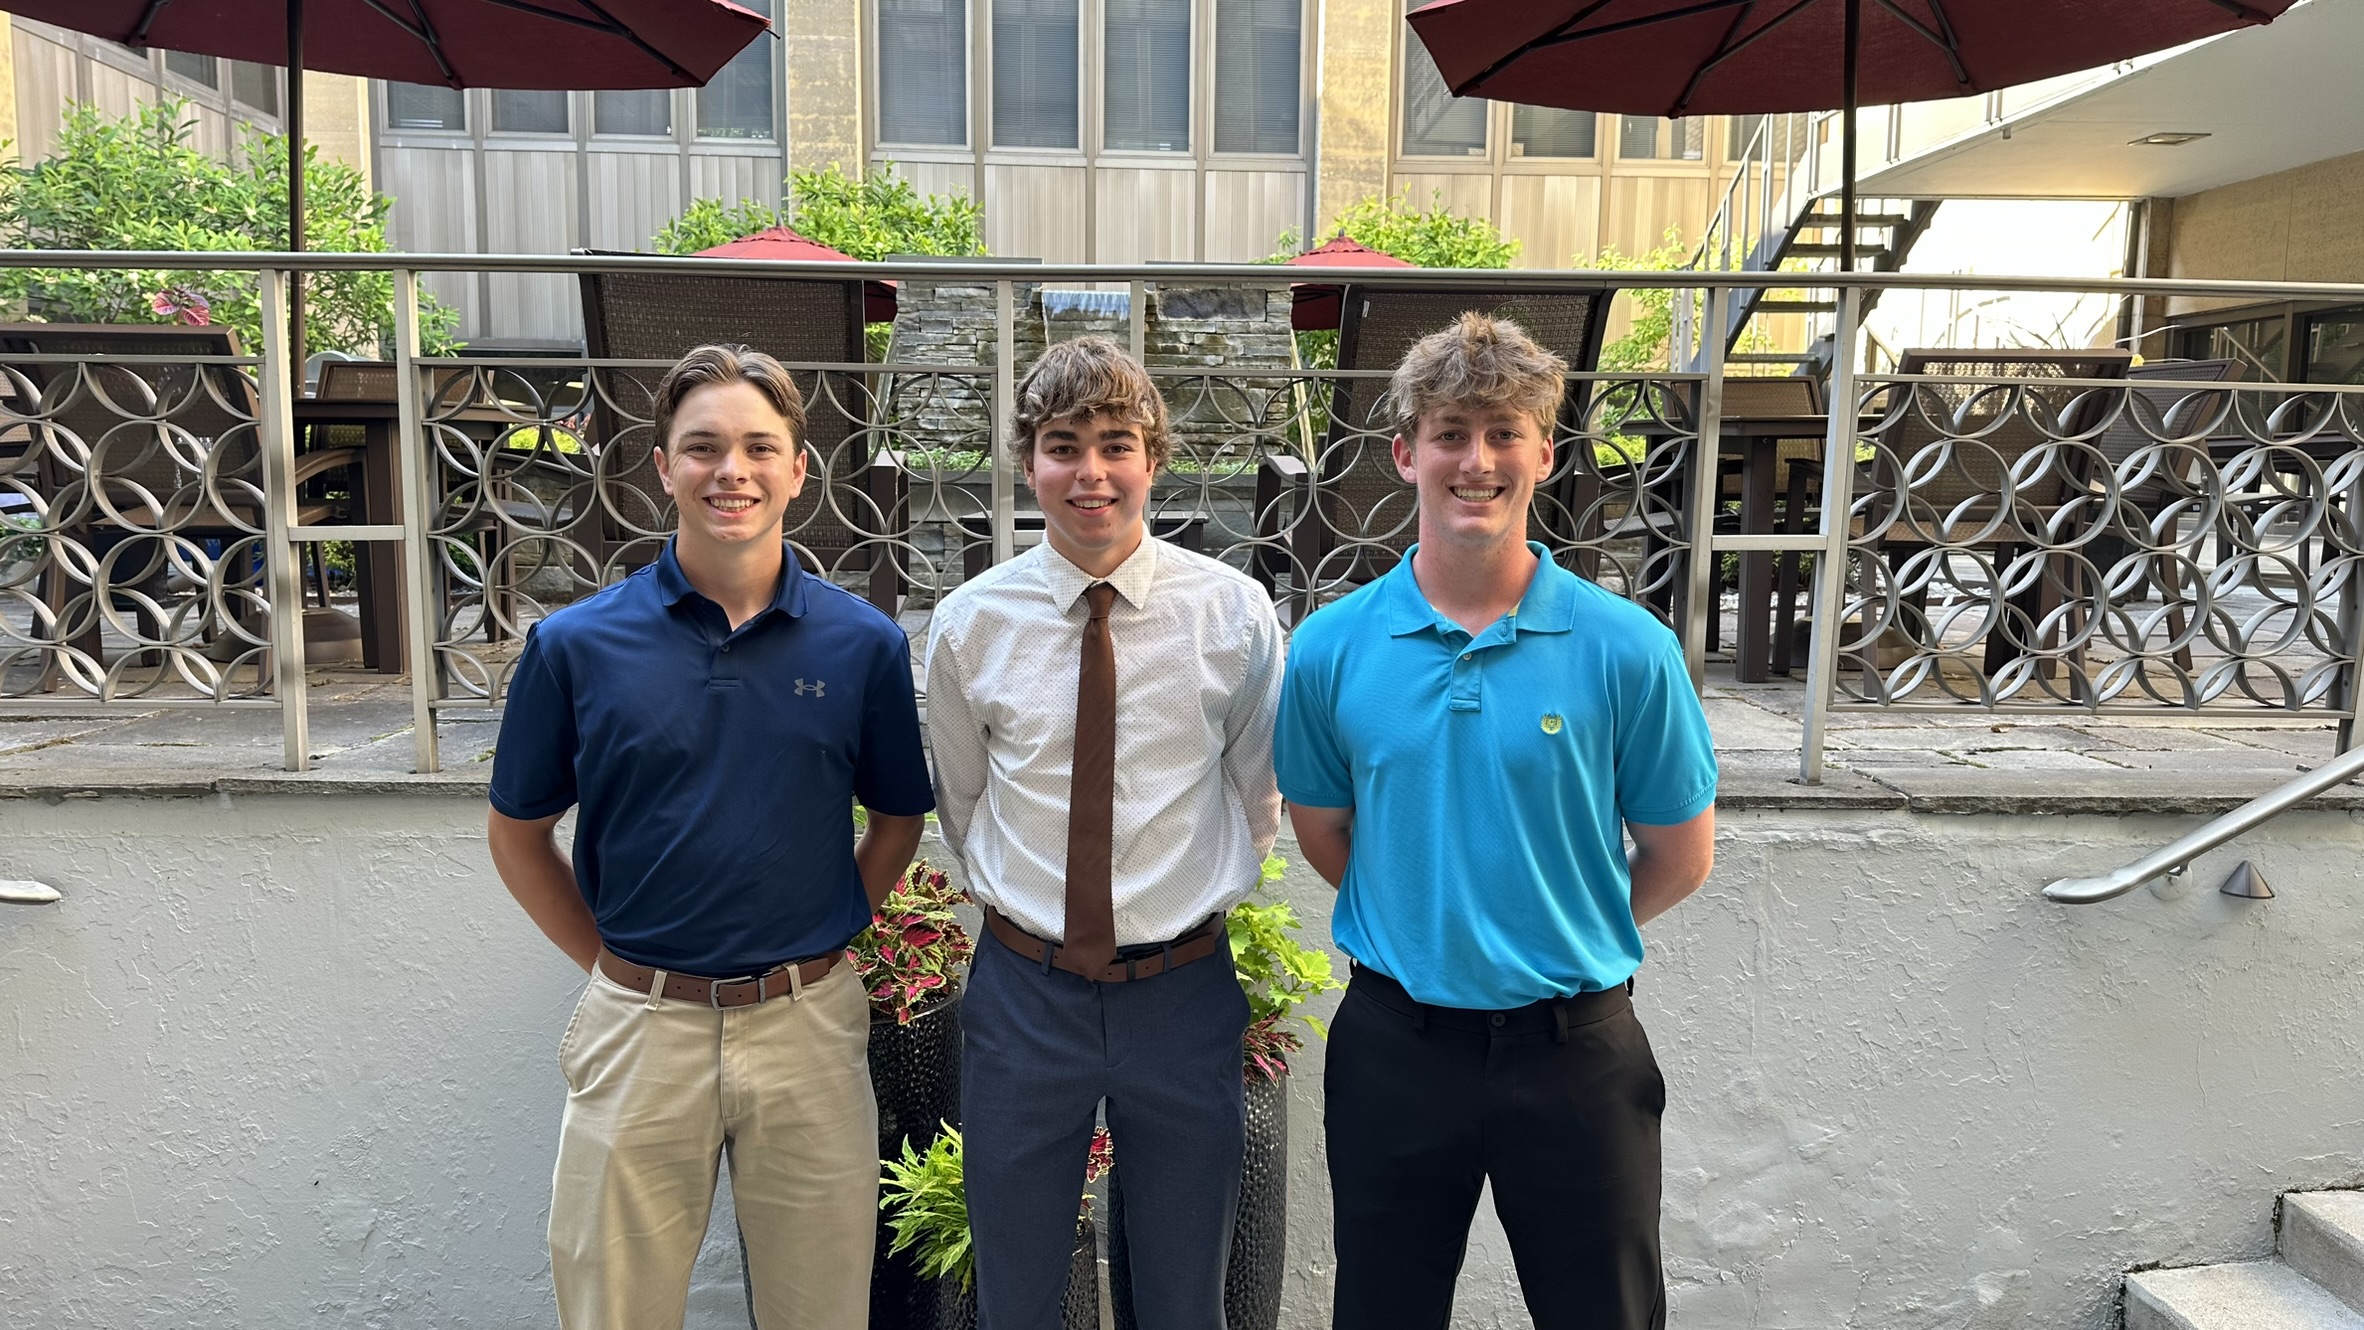 Pictured left to right are scholarship recipients Brandt Homan, Braxton Howell and Max Baumstark.